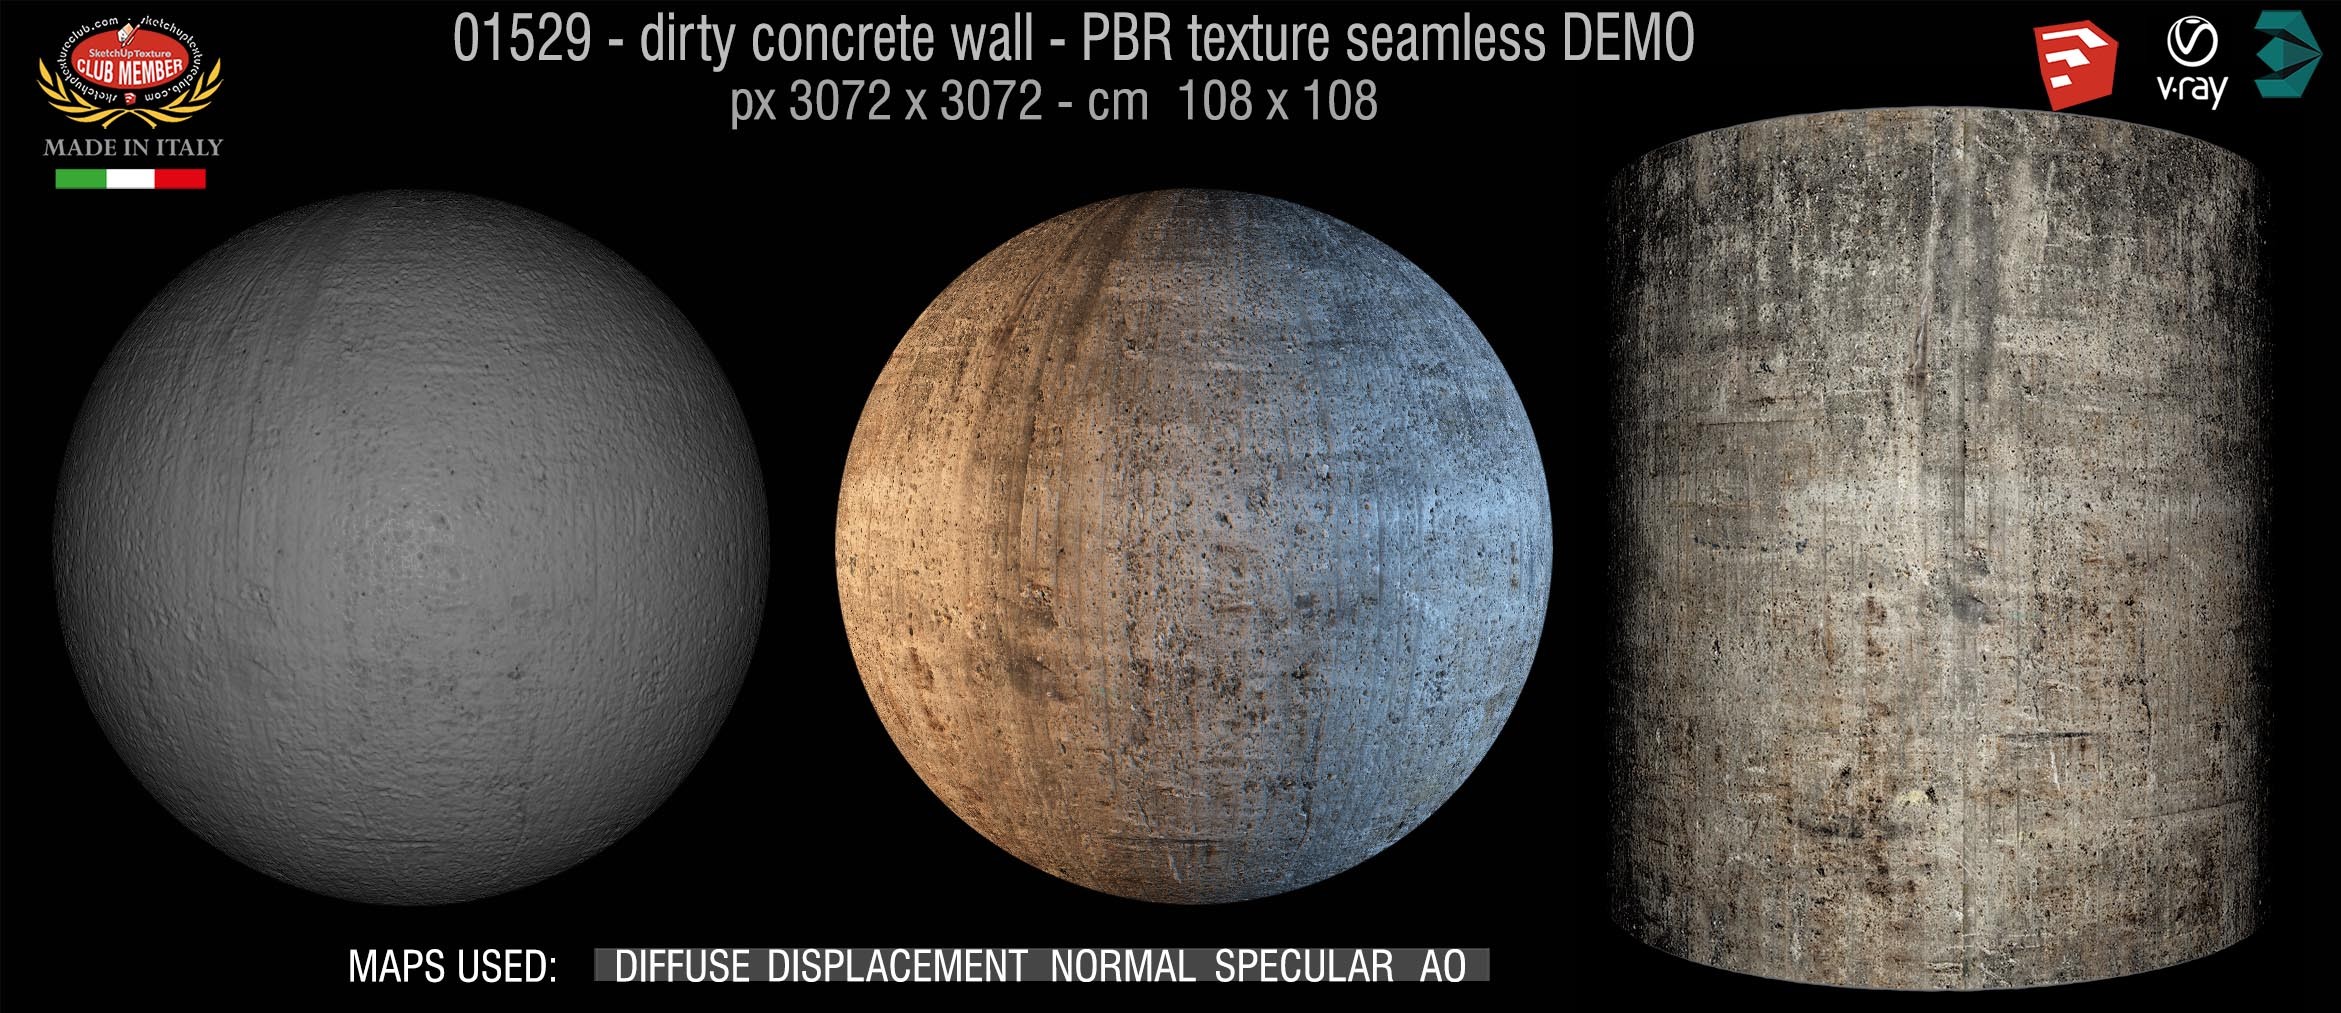 01529 Concrete bare dirty wall PBR texture seamless DEMO